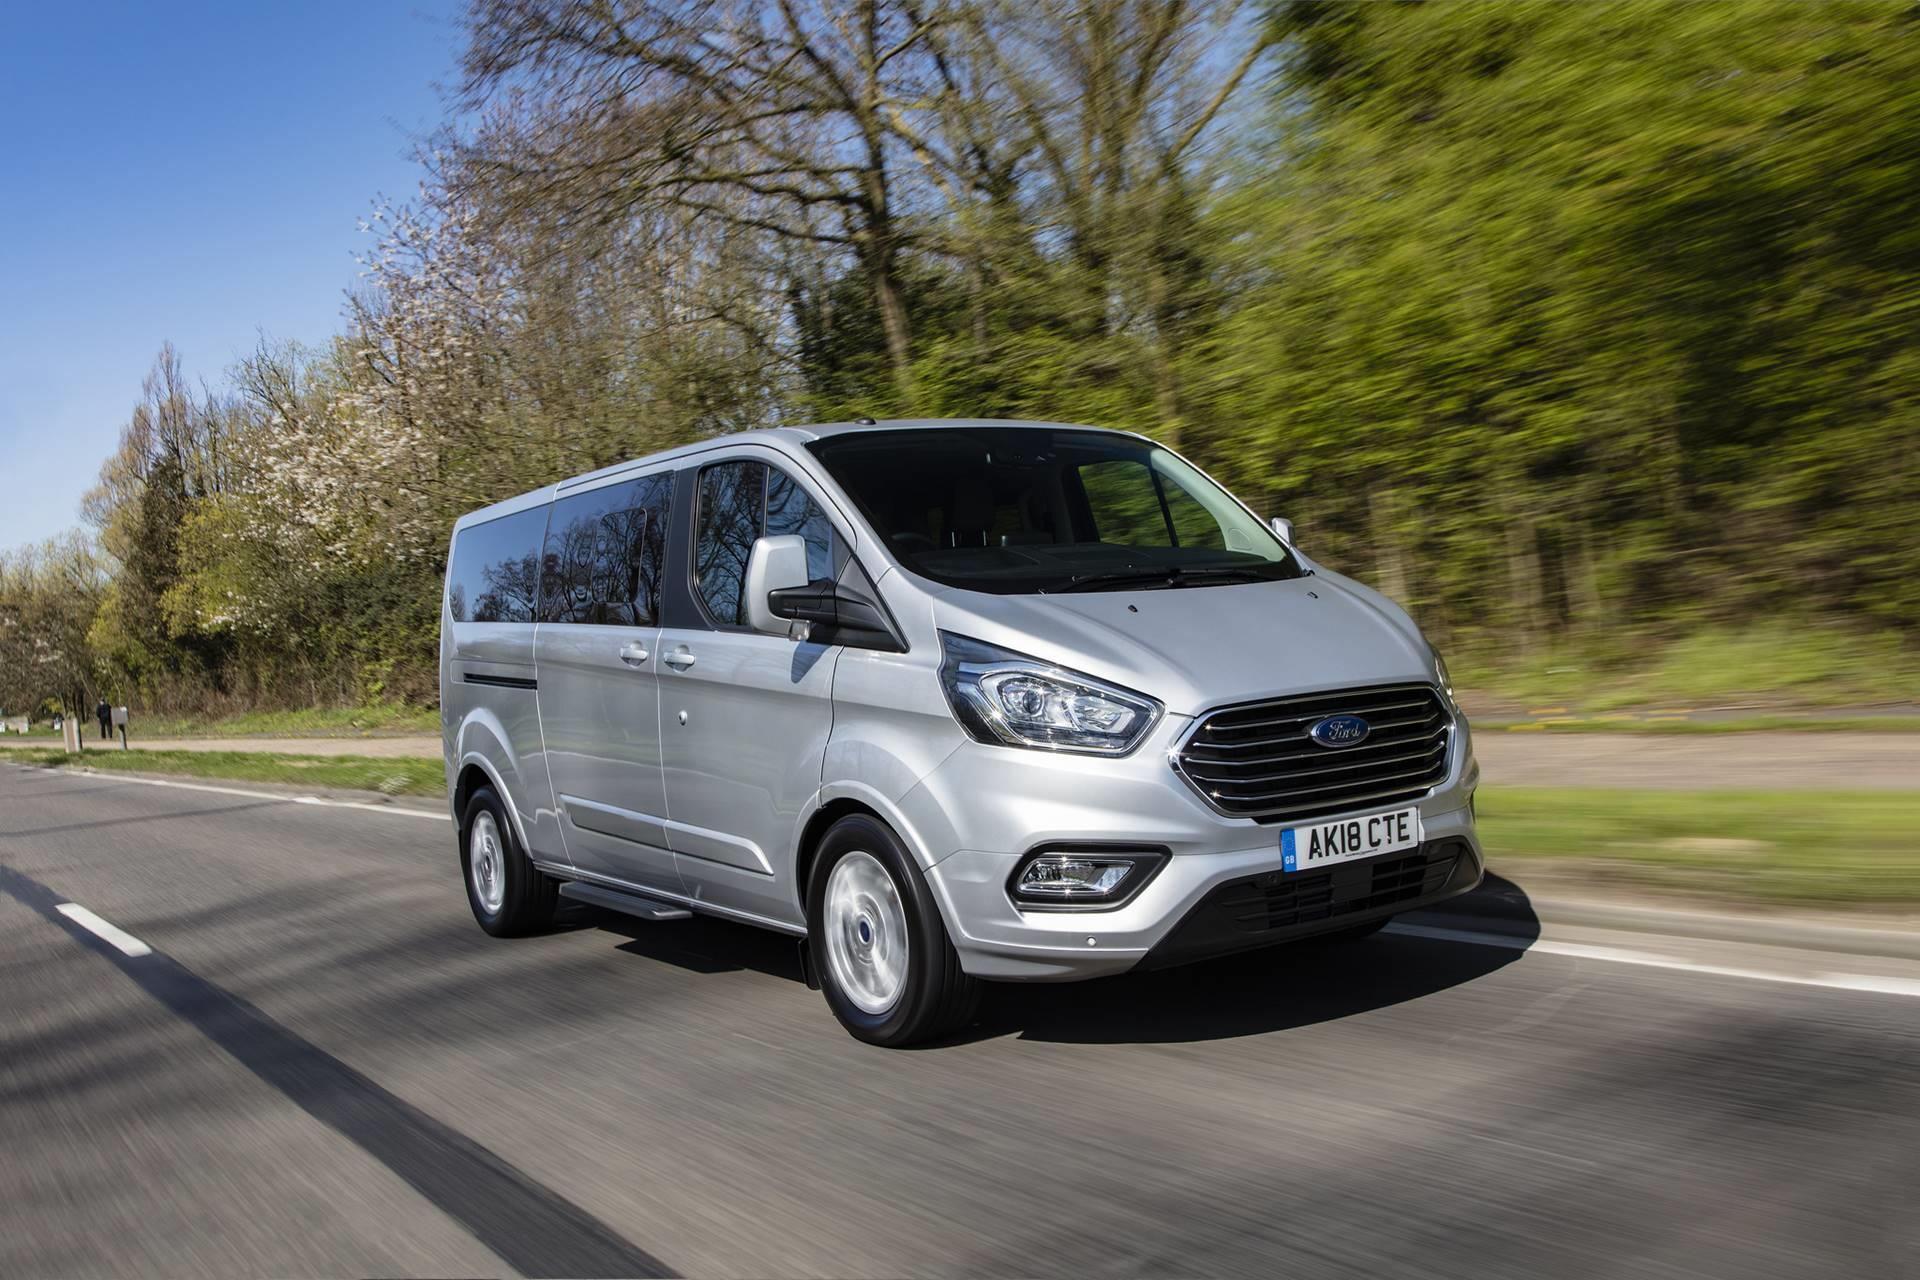 2019 Ford Tourneo Custom News and 